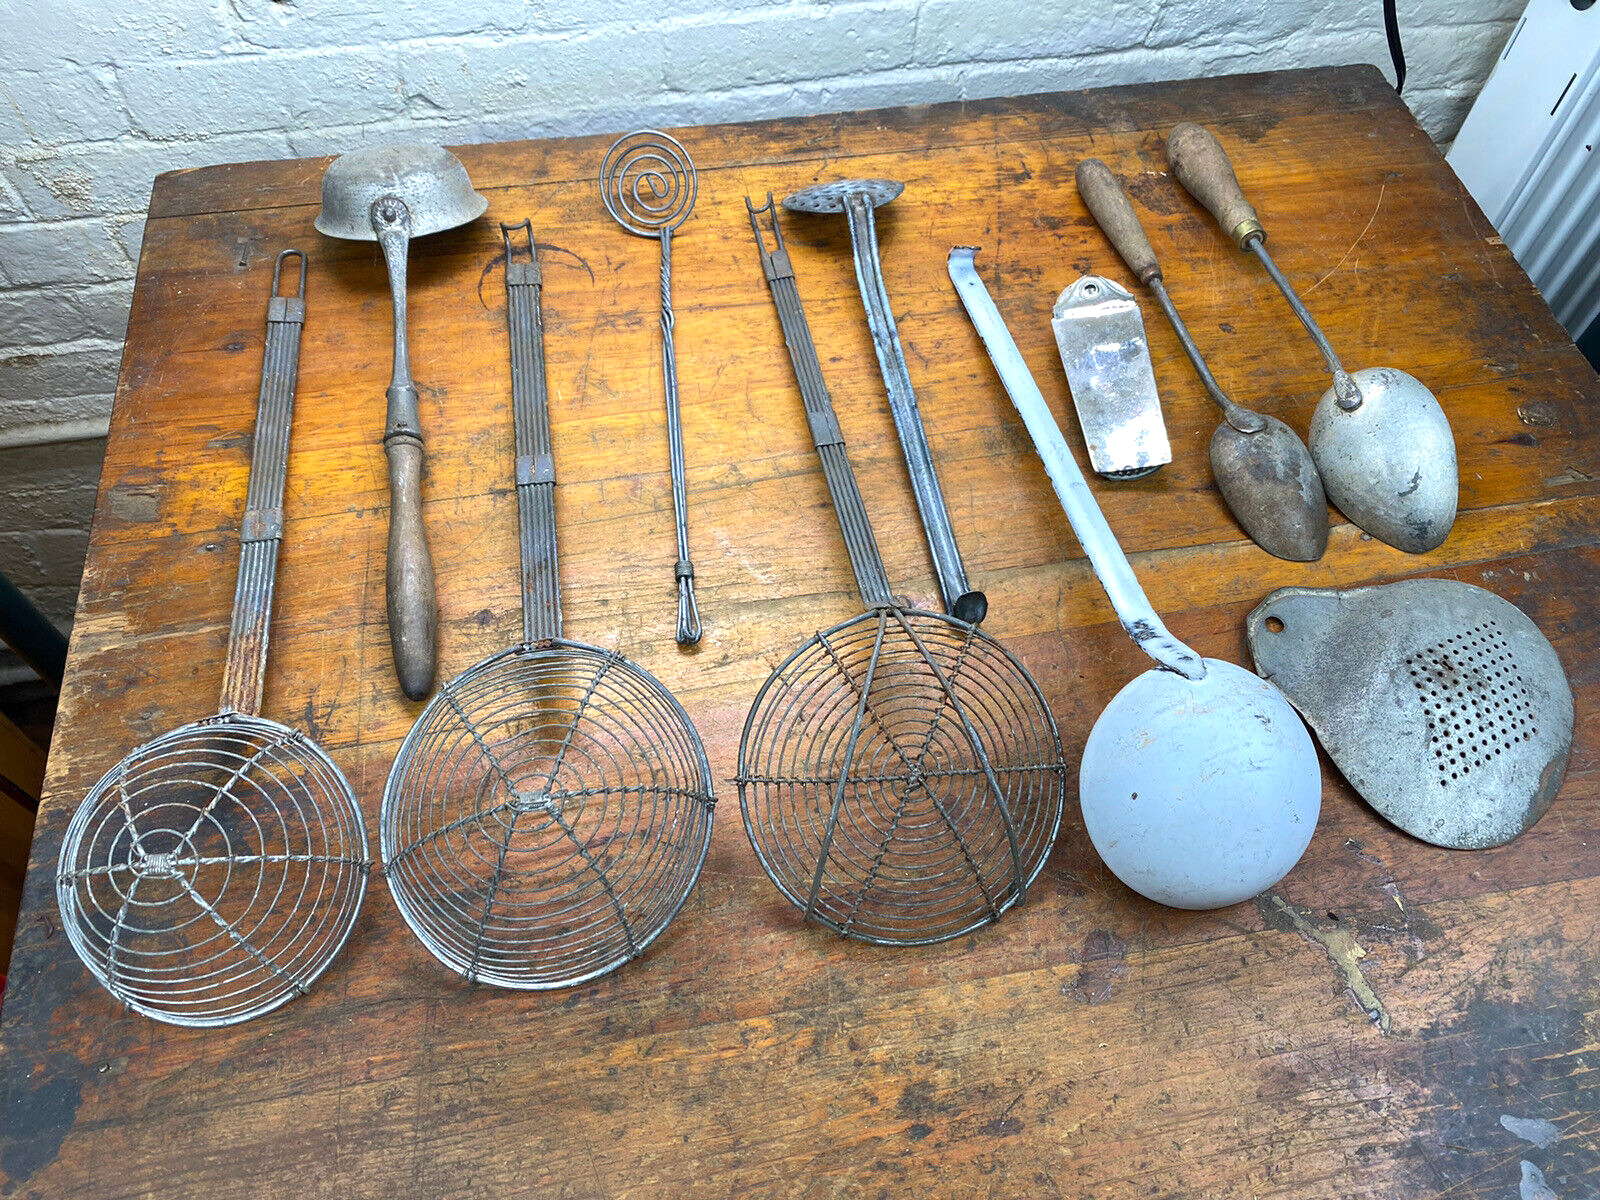 11 Pc. Old Kitchen Utensils, Tools ~ Ladle, Skimmer Strainers, Spoons, Grater